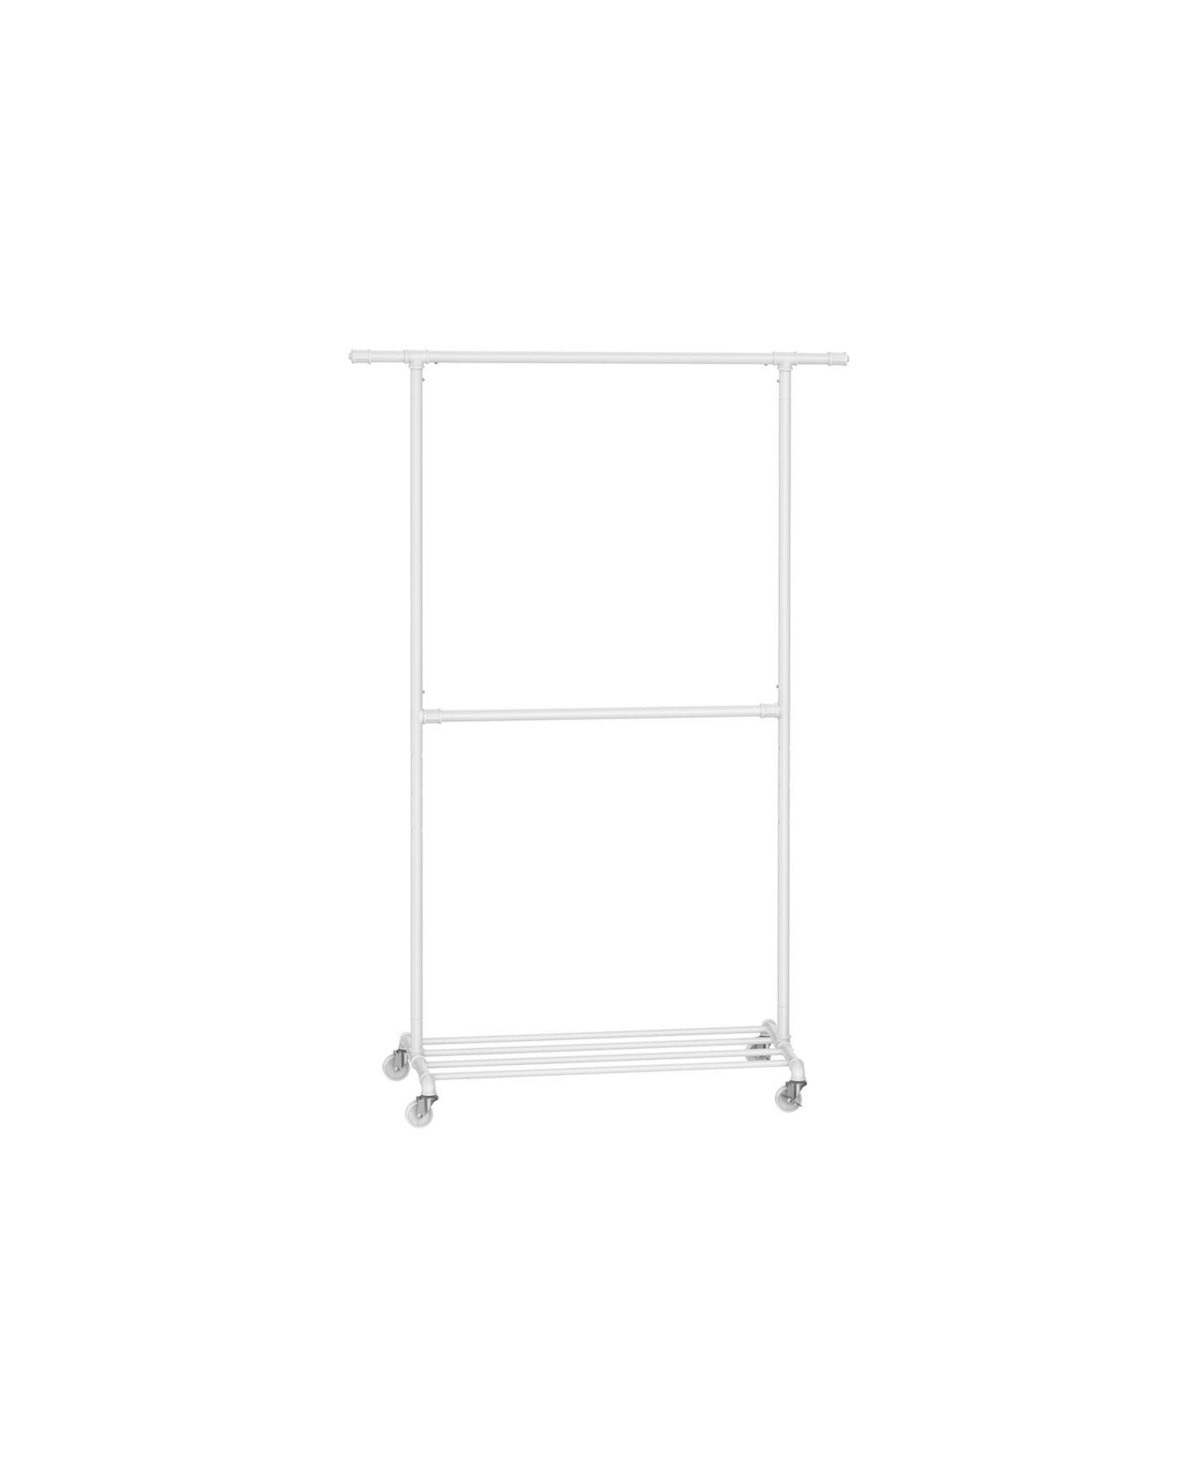 Double Hanging Rod Metal Clothing Rack, Industrial Style Clothes Garment Rack On Wheels - White